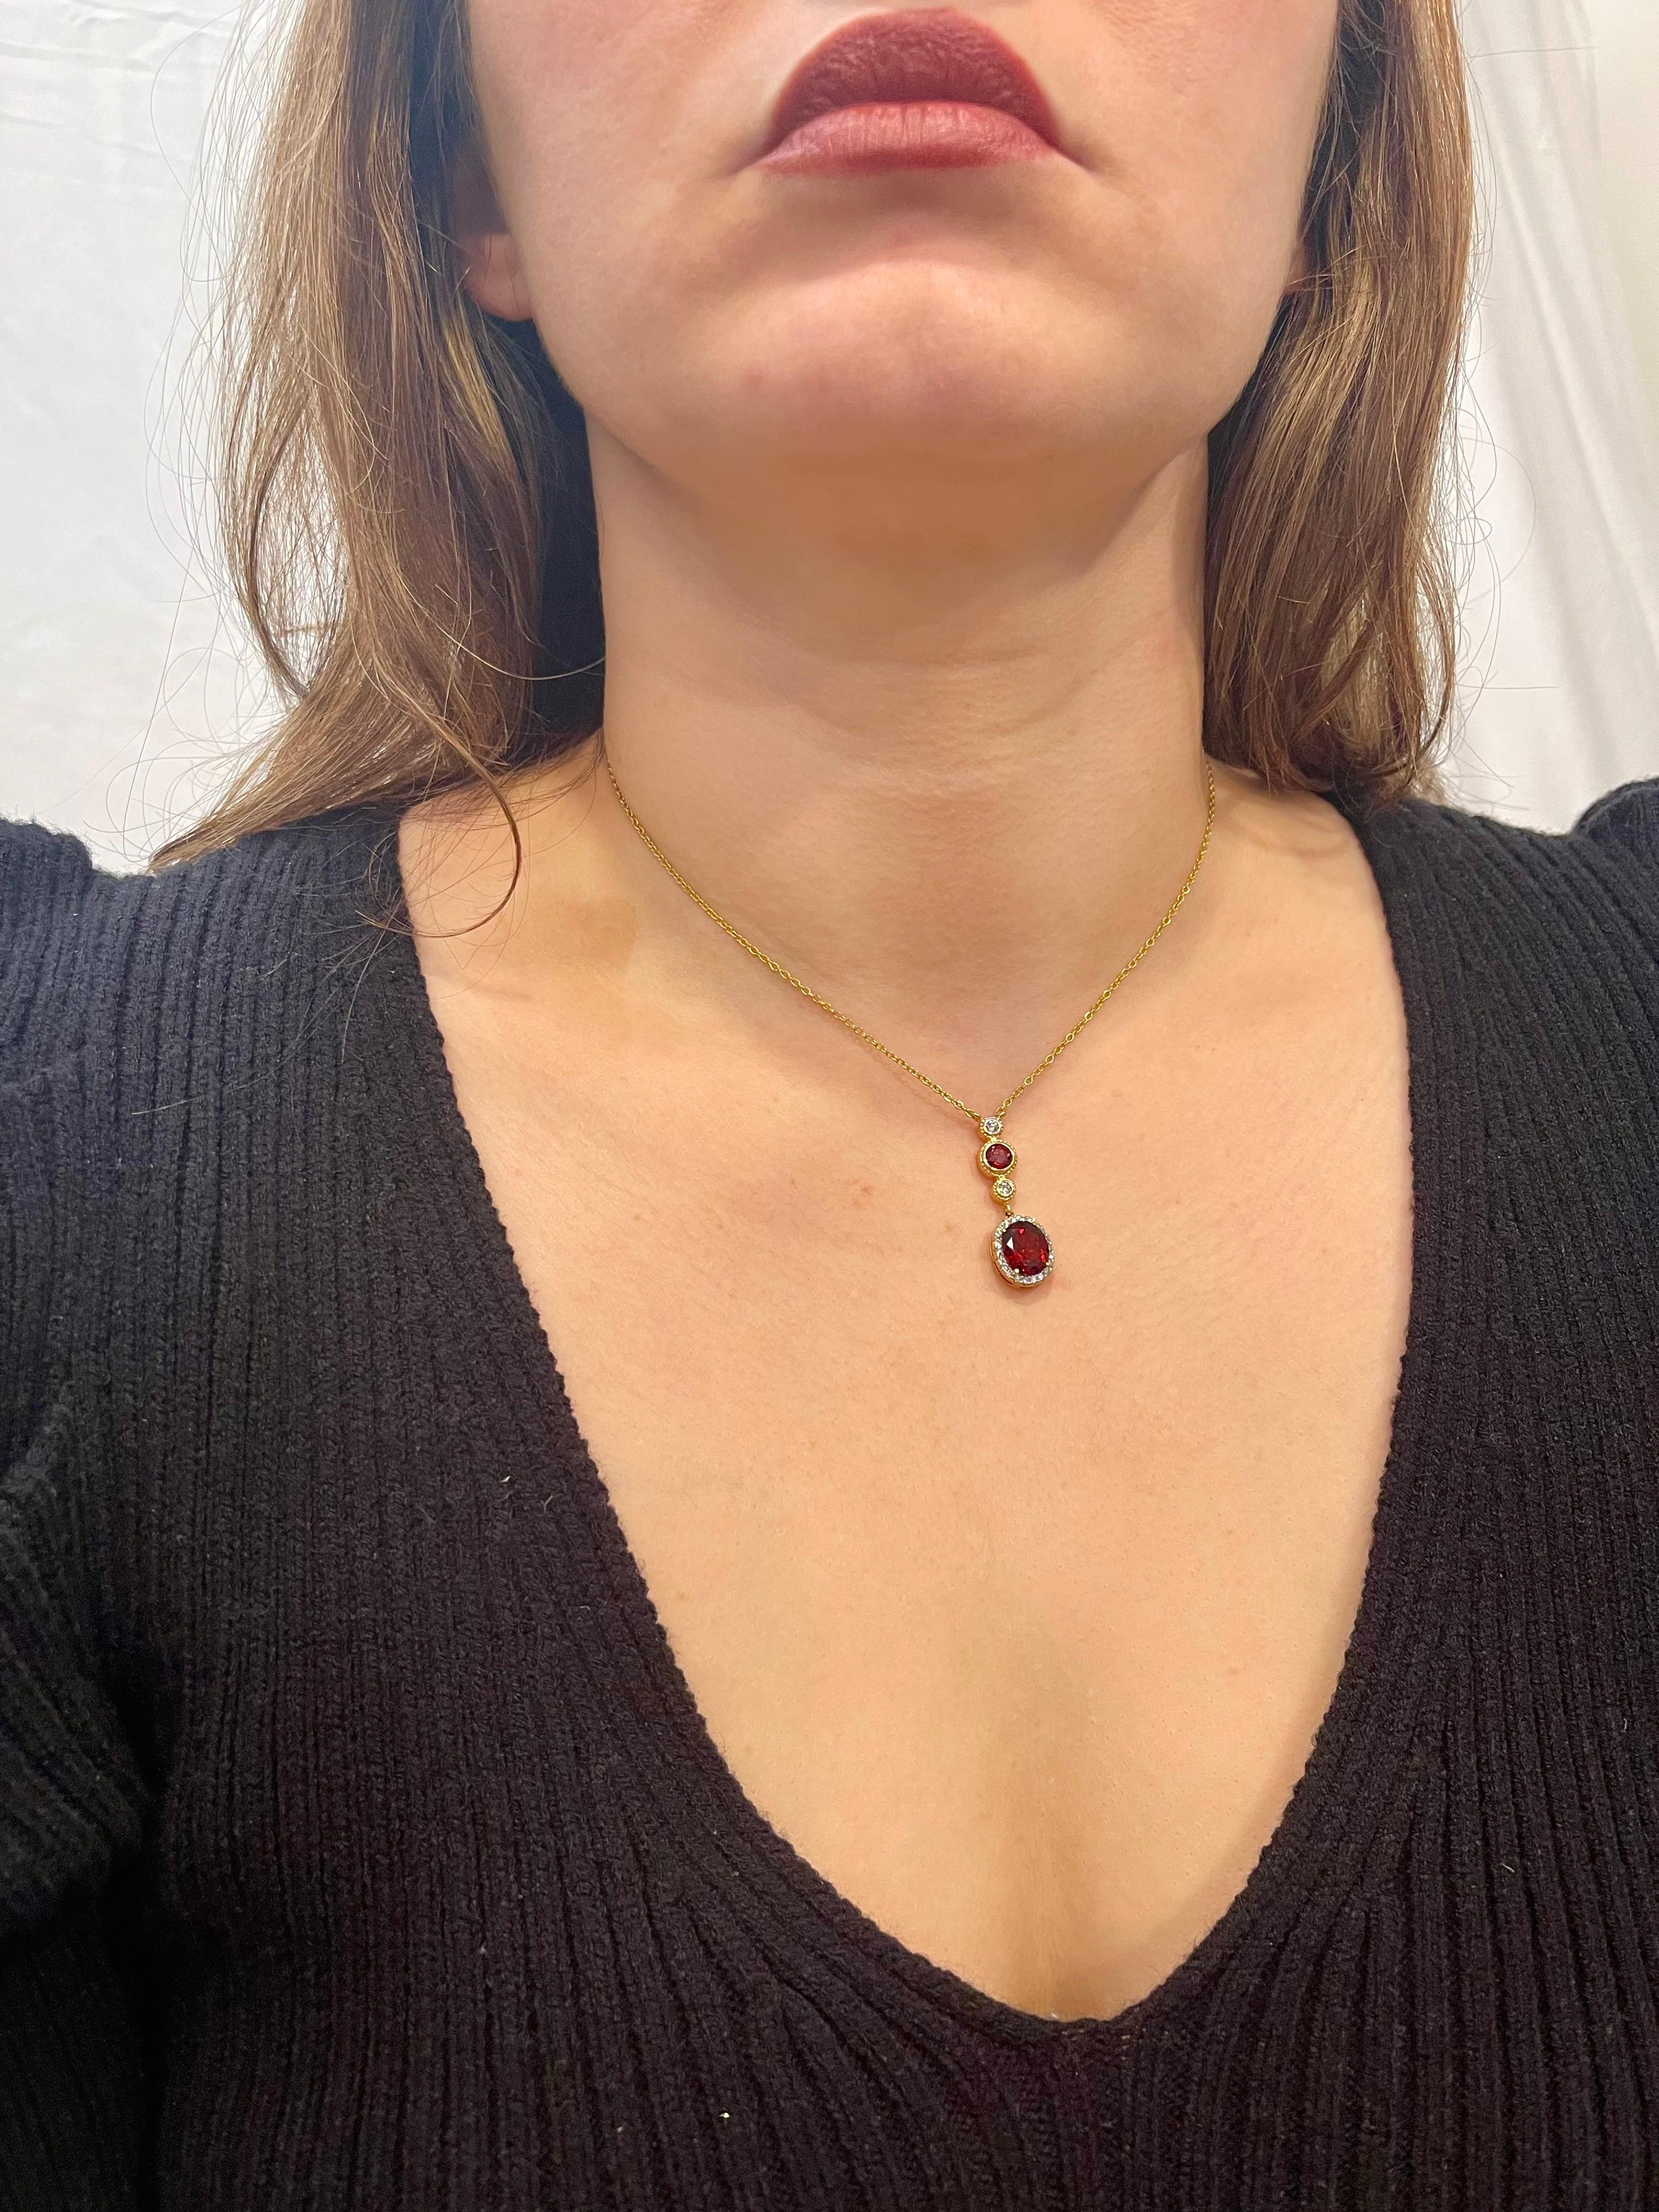 6 Carat Oval Shape Garnet and 0.6 Carat Diamond Necklace in 14 Karat Yellow Gold For Sale 8